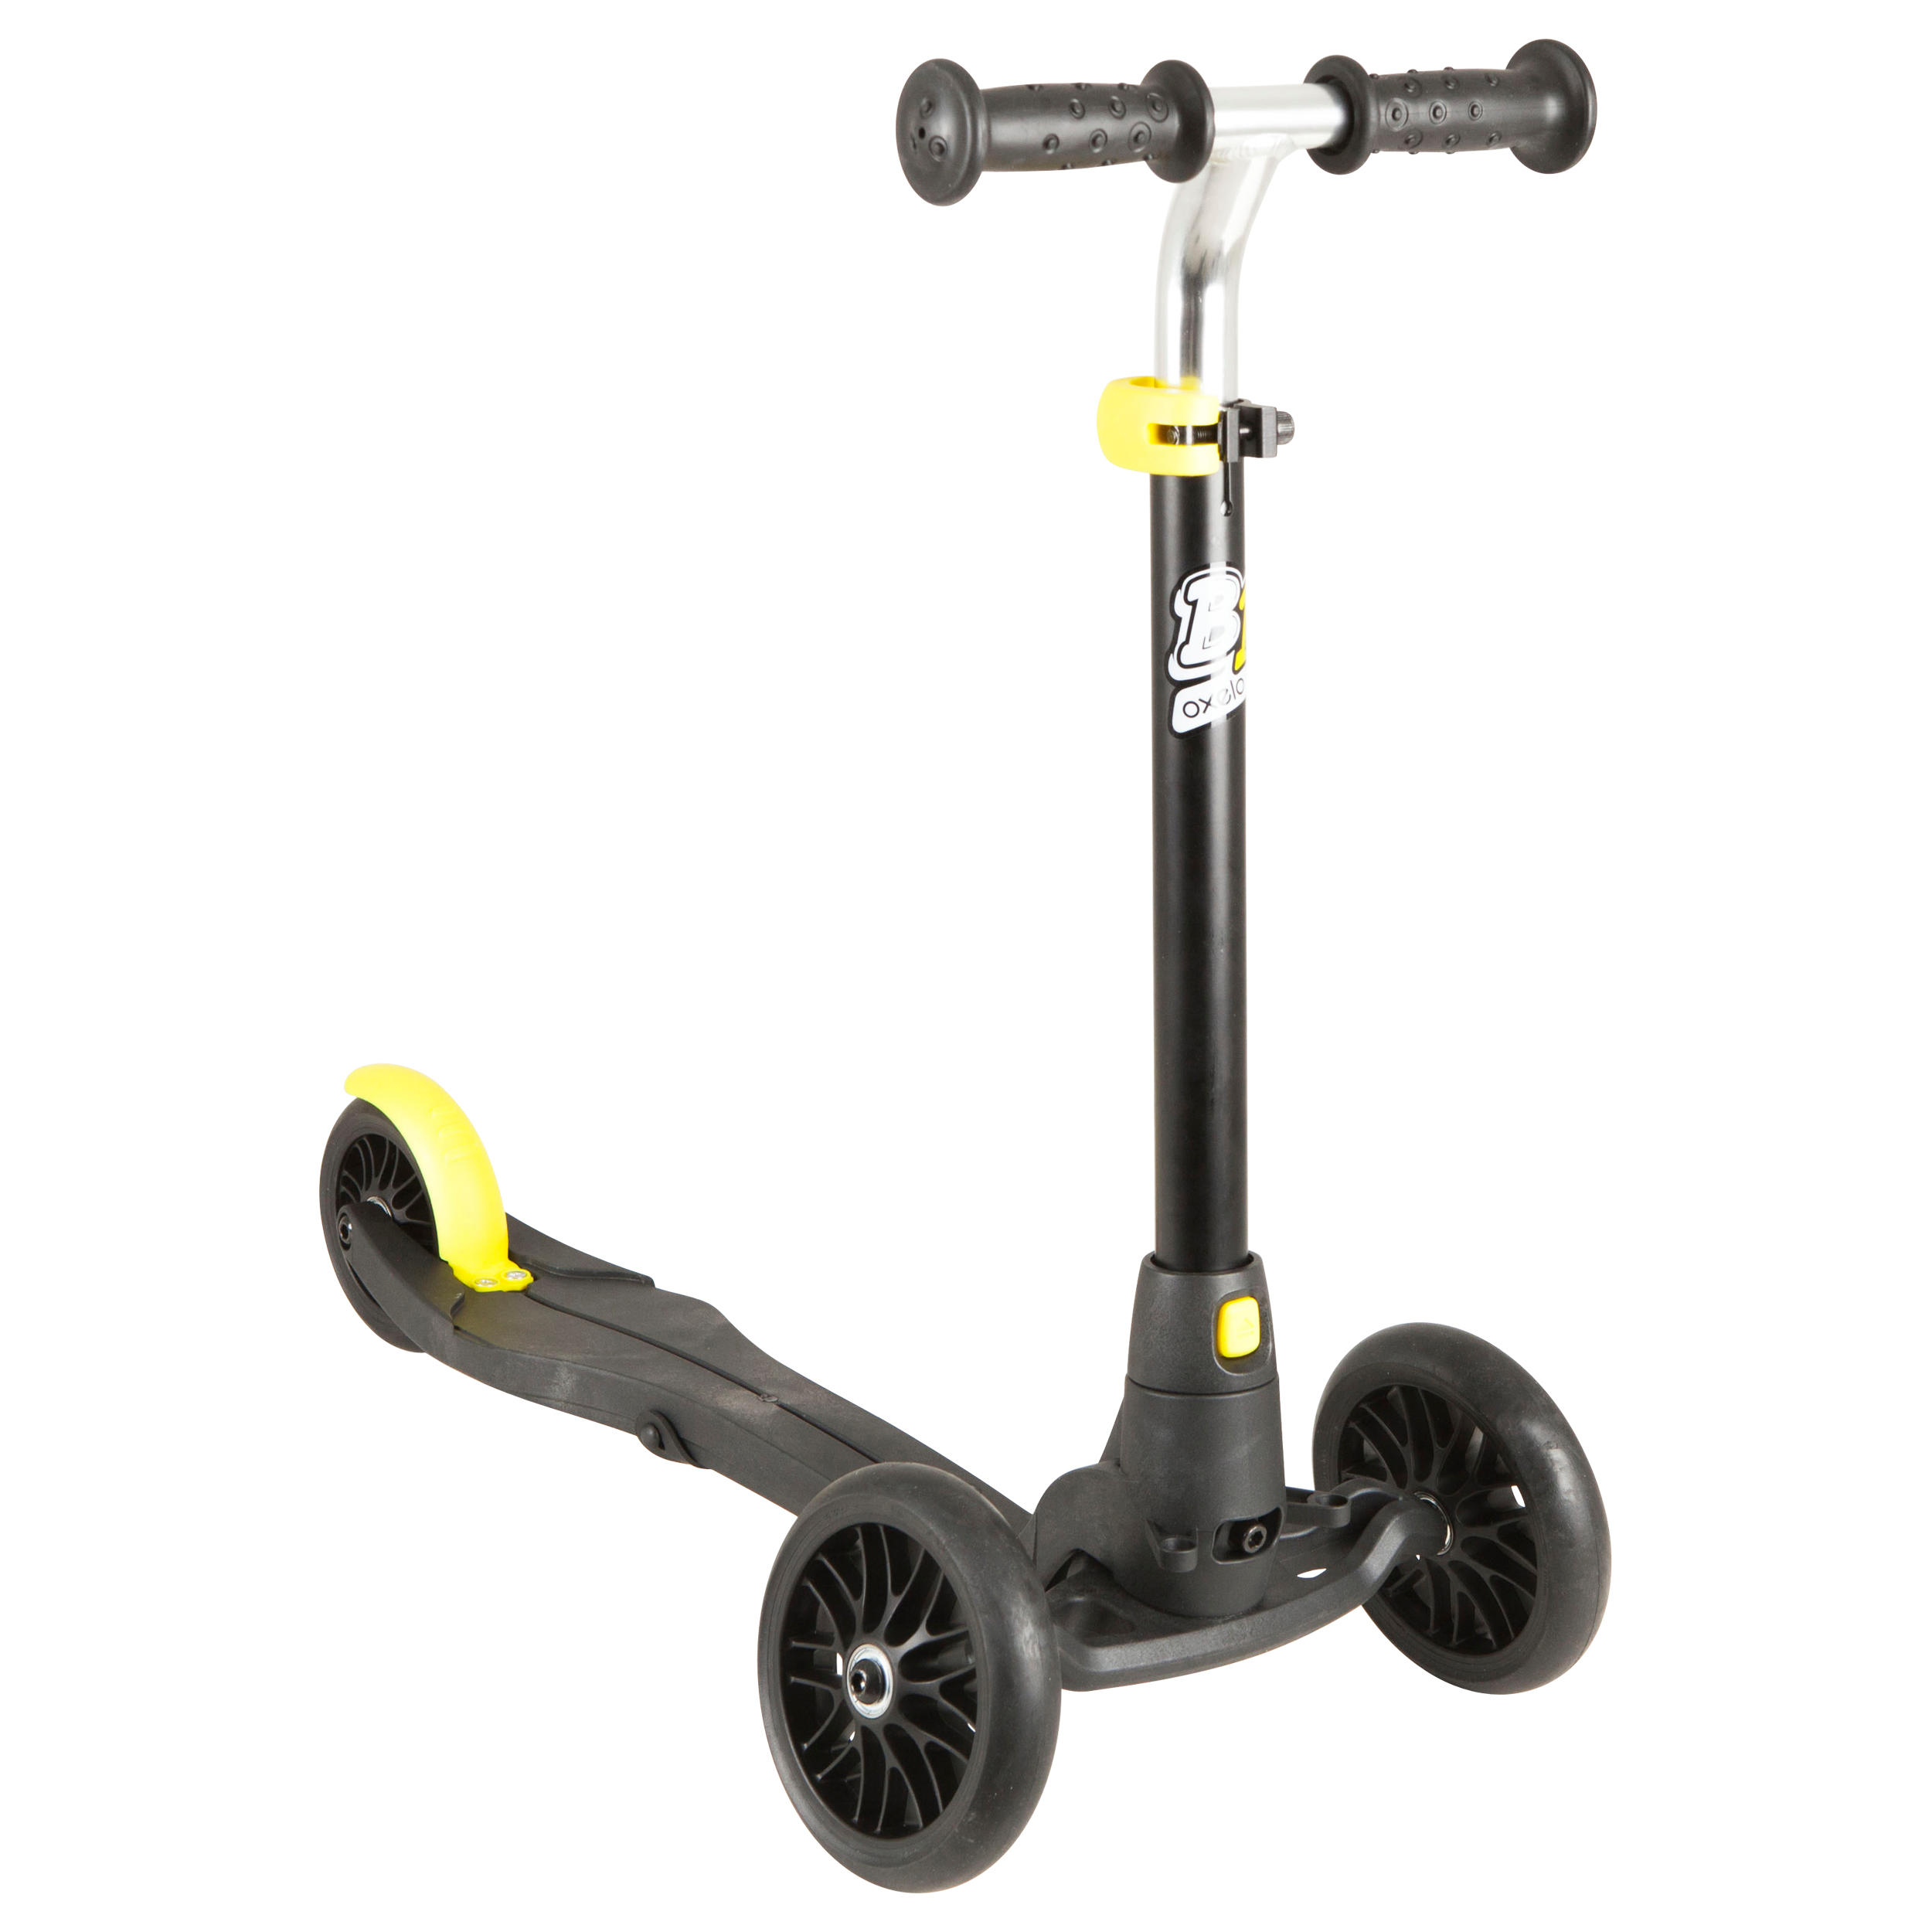 decathlon childrens scooters